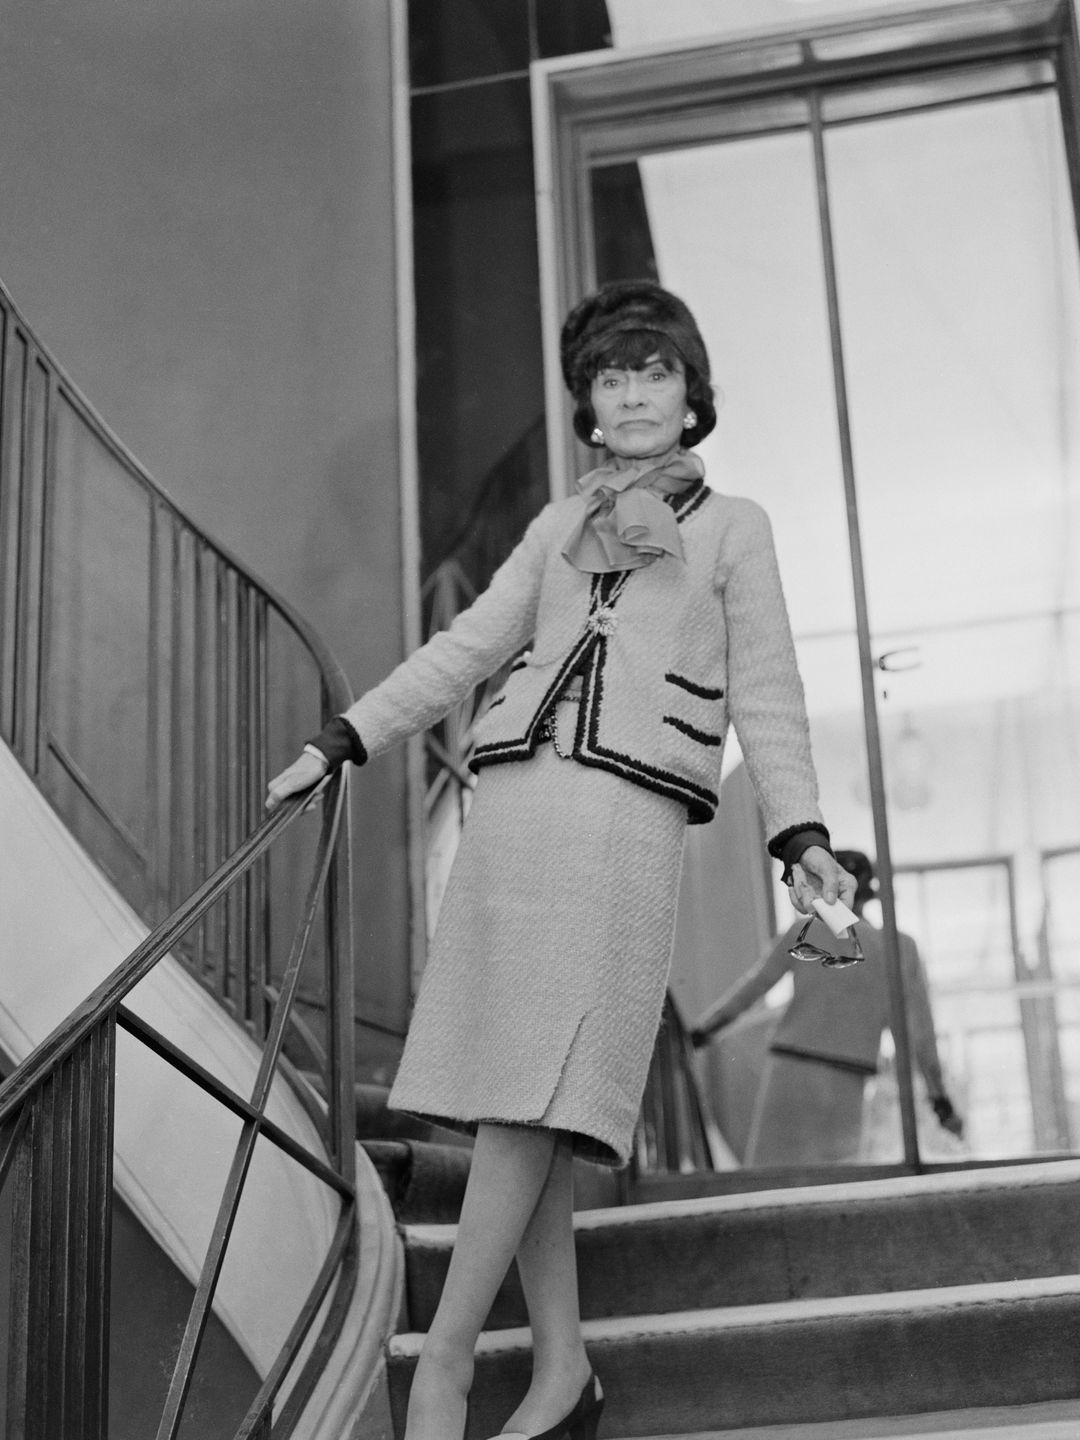 The V&A is putting on an exhibition about the life and work of Gabrielle 'Coco' Chanel 